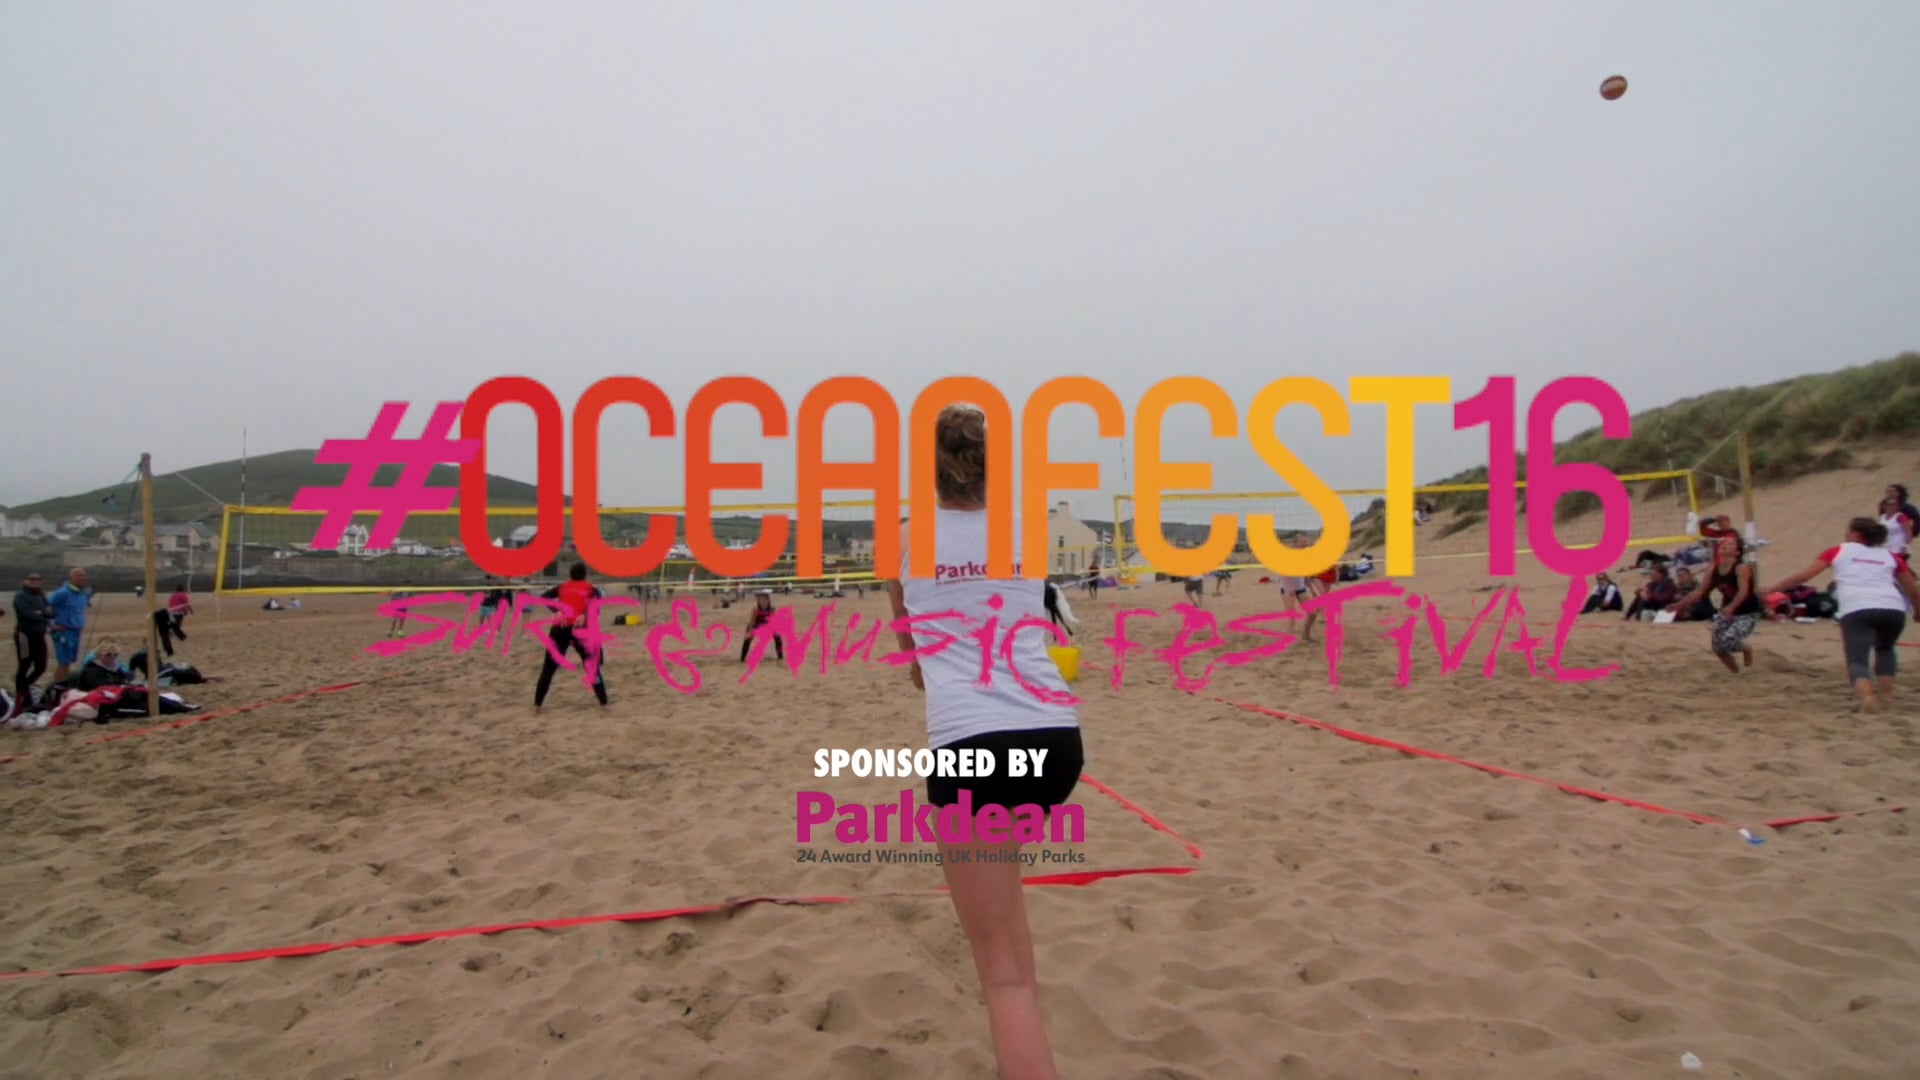 GOLDCOAST OCEANFEST 16 VOLLEYBALL PARKDEAN on Vimeo